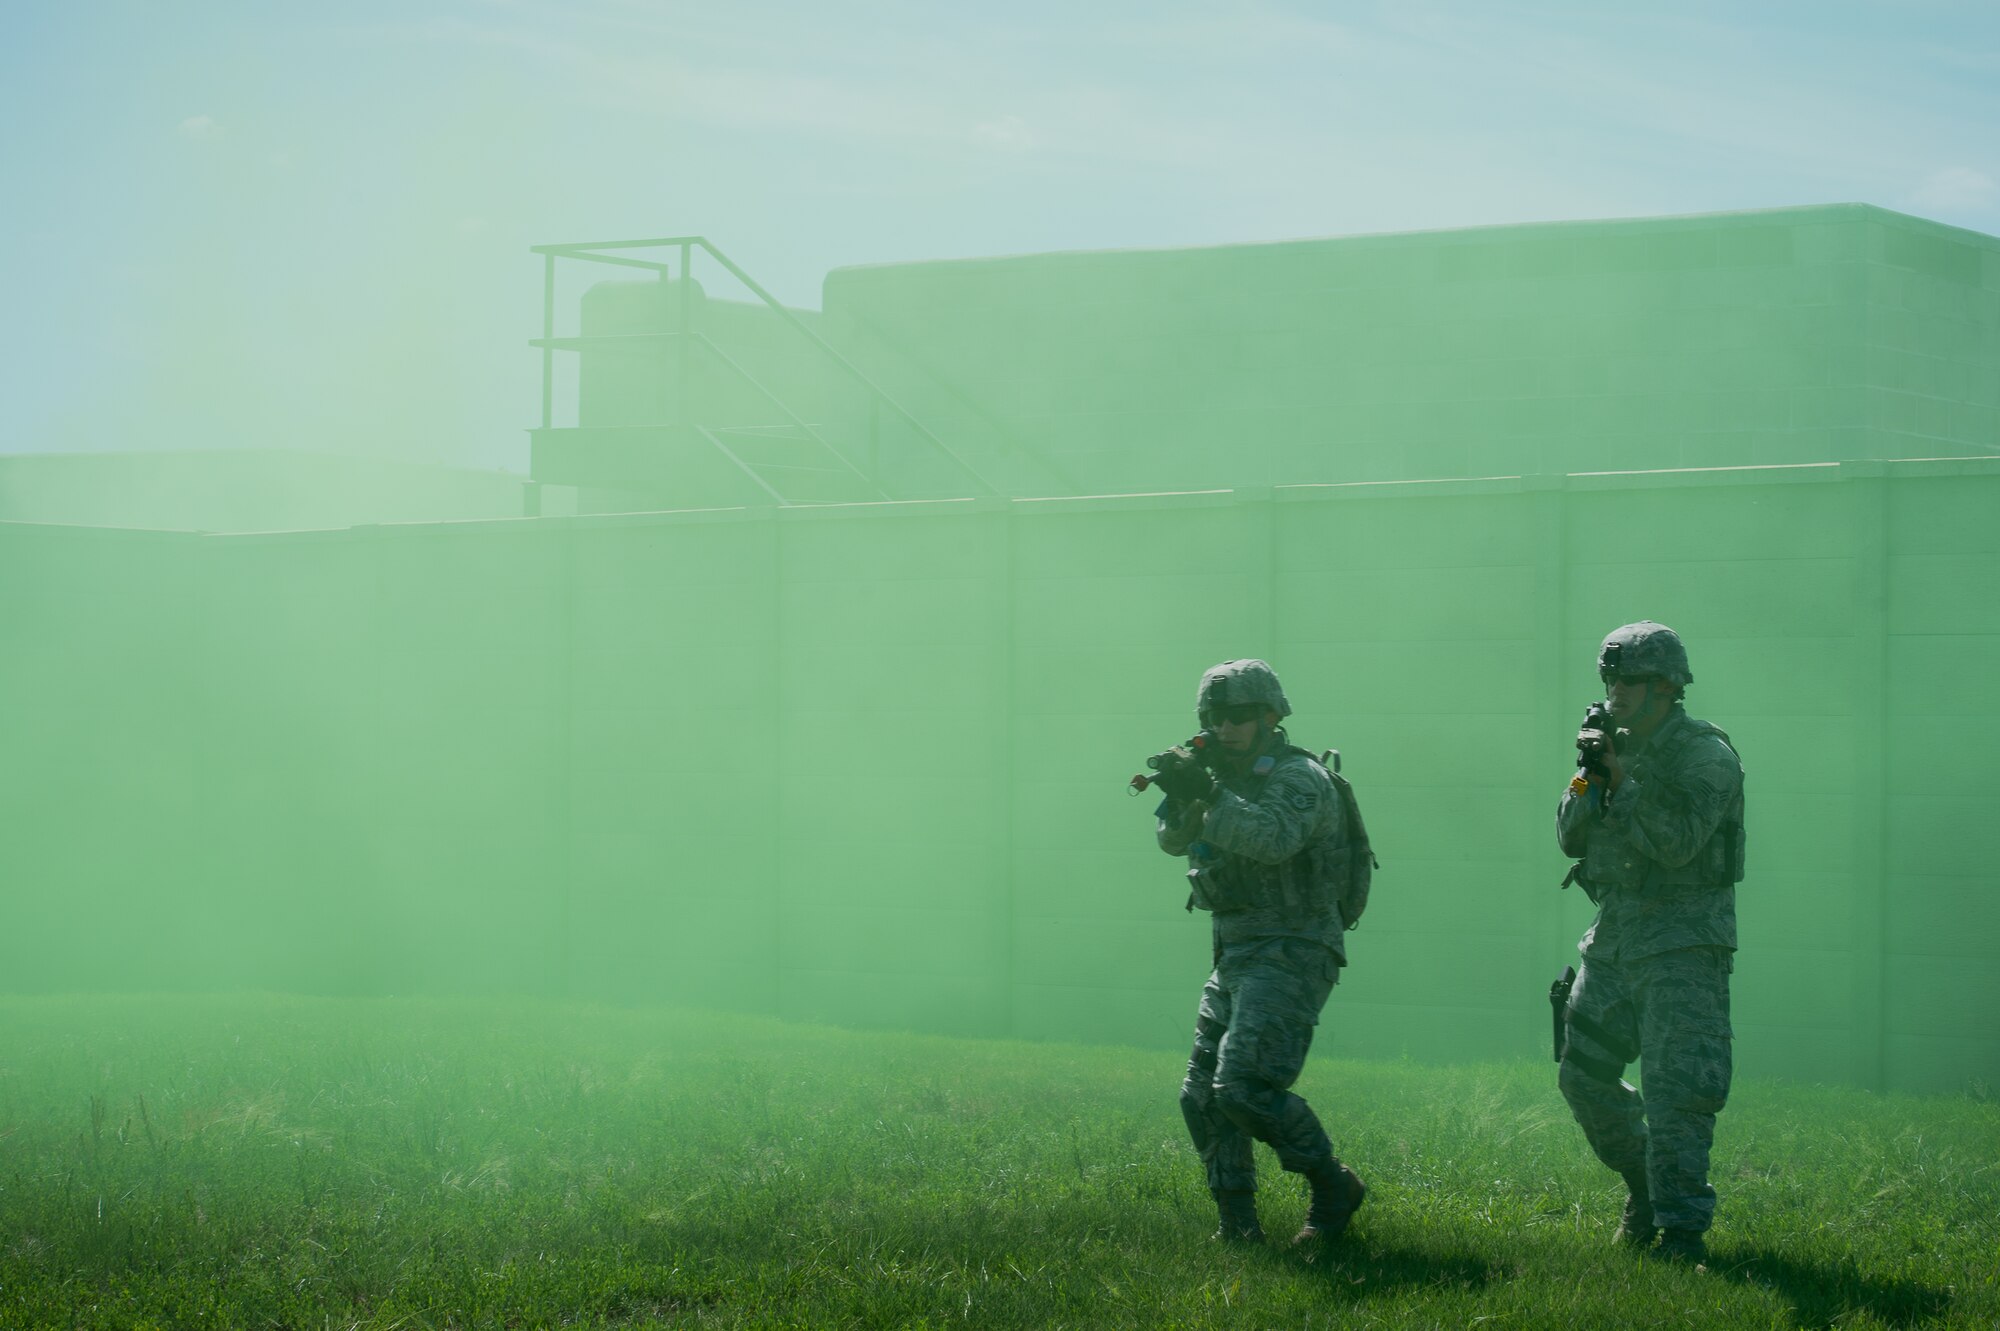 Staff Sgt. Jared Tooley and Senior Airman Eliezer Najera, 137th Security Forces Squadron Airmen, engage a target through green smoke during an urban terrain scenario at Camp Gruber Training Center near Braggs, Okla., Aug. 3, 2016.  Approximately 40 members of the 137 SFS completed annual training from July 29 to Aug, 5, 2016. Airmen participated in extensive training exercises including close combat, weapons, military operations on urban terrain and navigation. (U.S. Air National Guard photo by Senior Airman Tyler Woodward/Released)